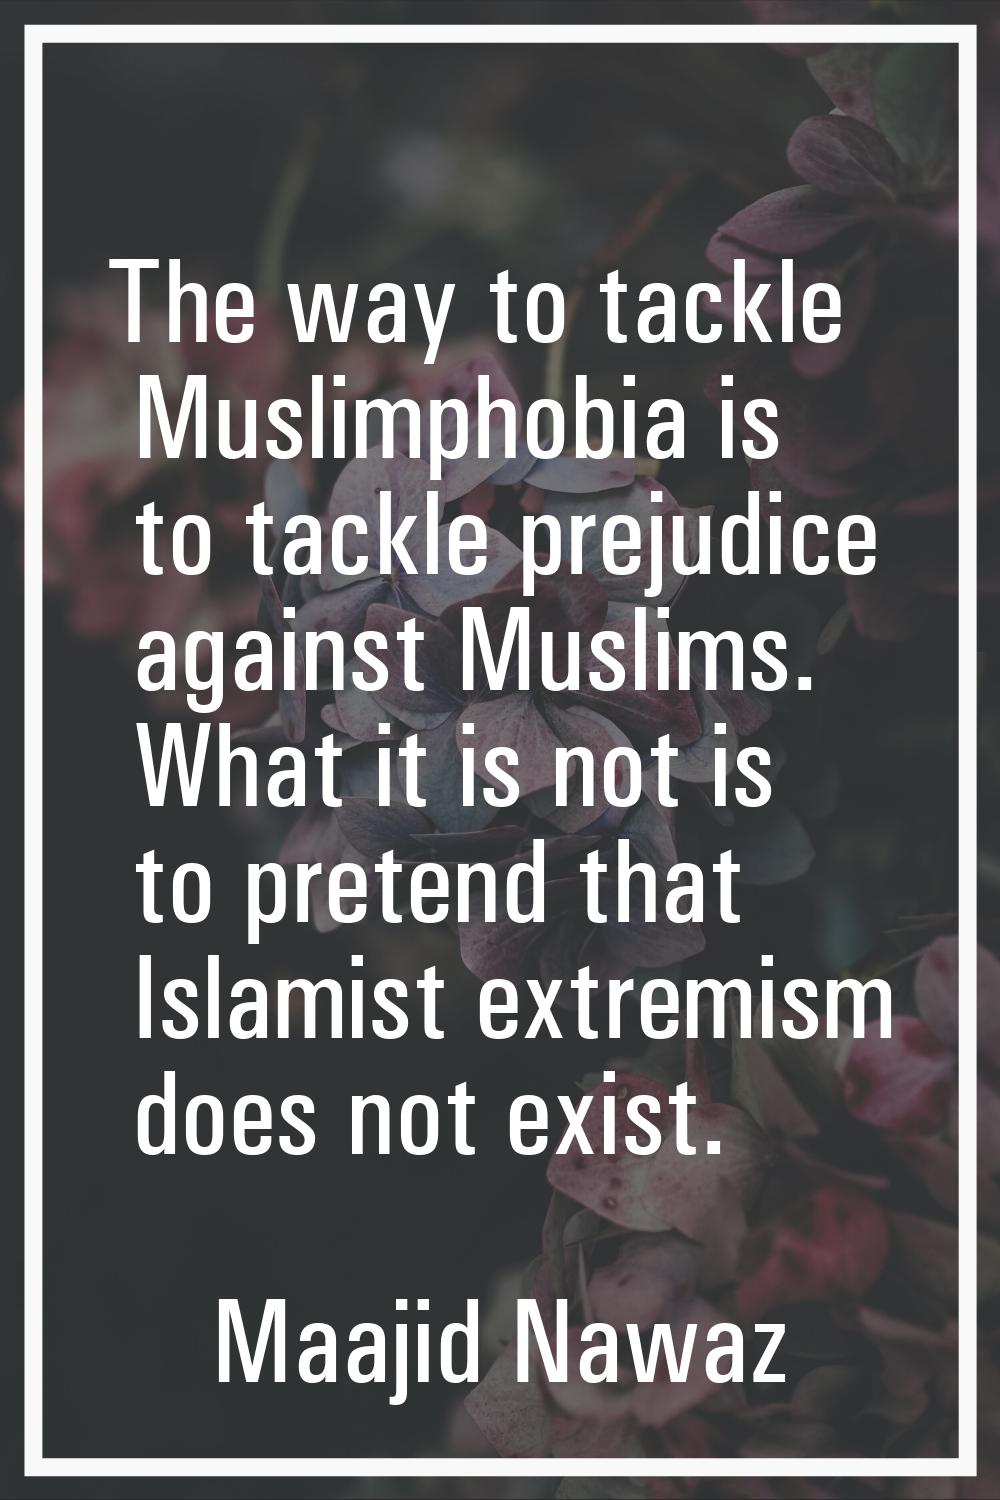 The way to tackle Muslimphobia is to tackle prejudice against Muslims. What it is not is to pretend